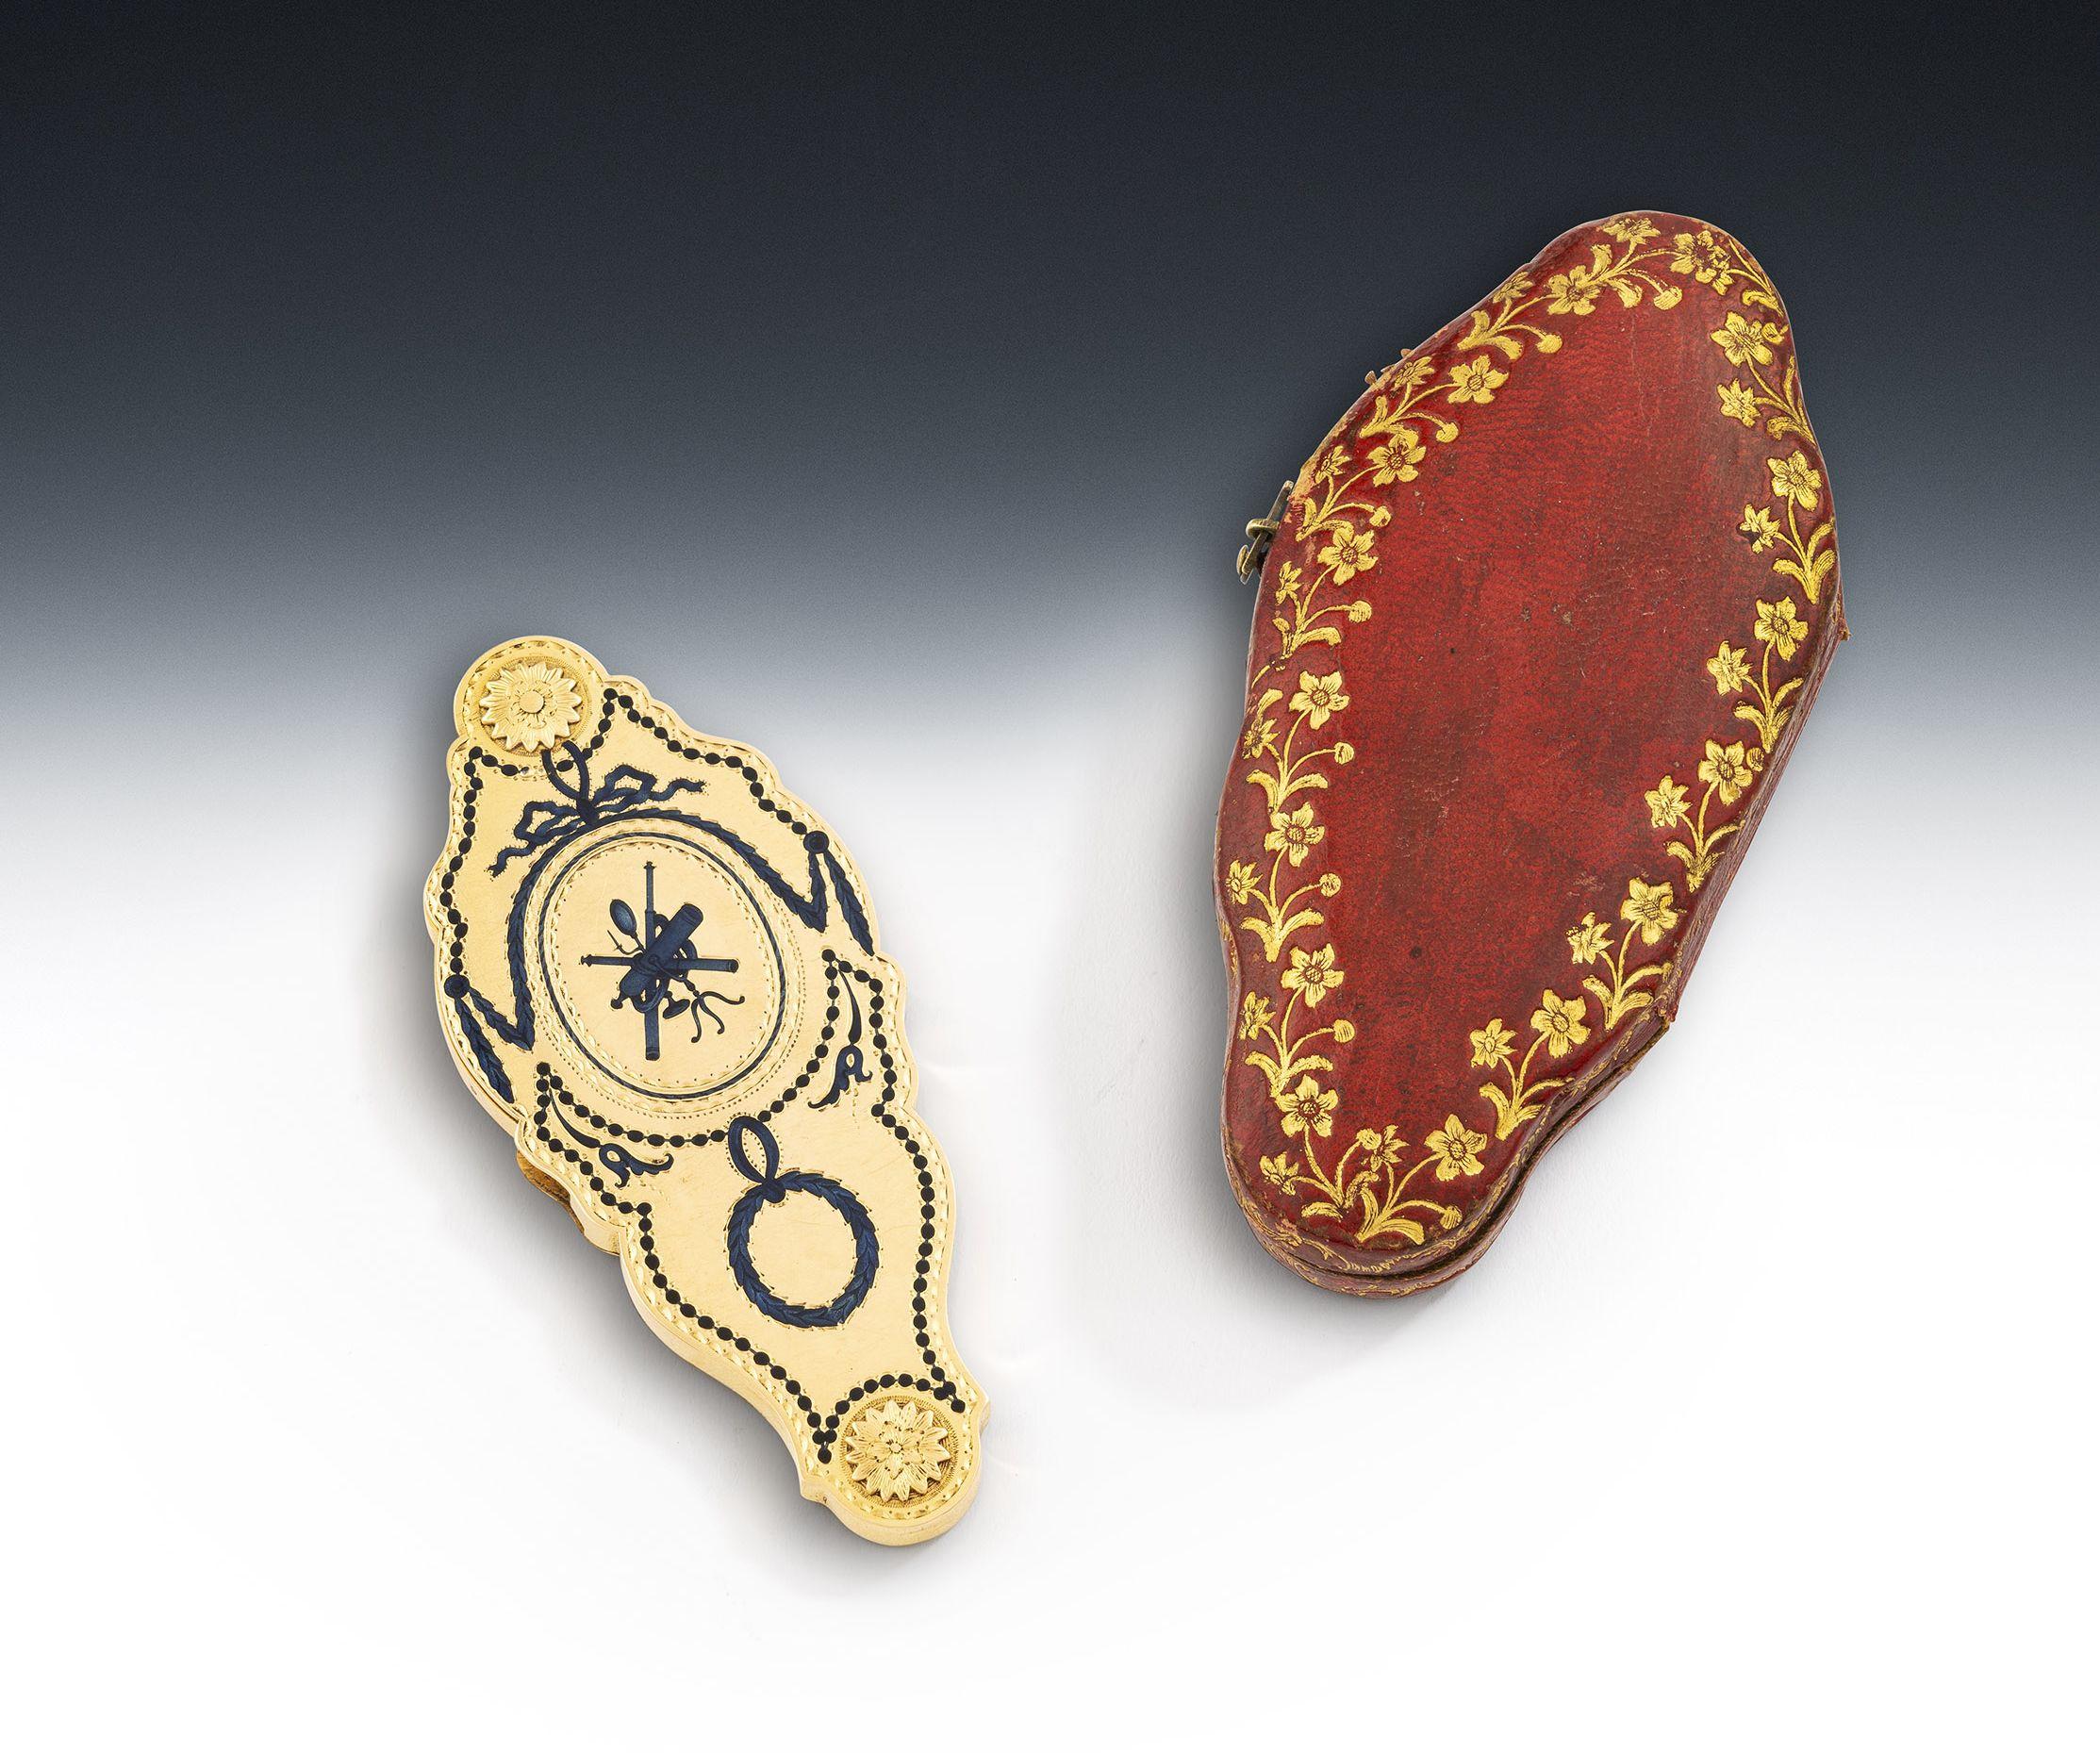 An important, and extremely rare, early George III Gold & Enamel Magnifying Glass, with original red leather case. Made almost certainly in London circa 1770.

The Gold case is of shaped rectangular form, with bright cut borders and raised, chased,